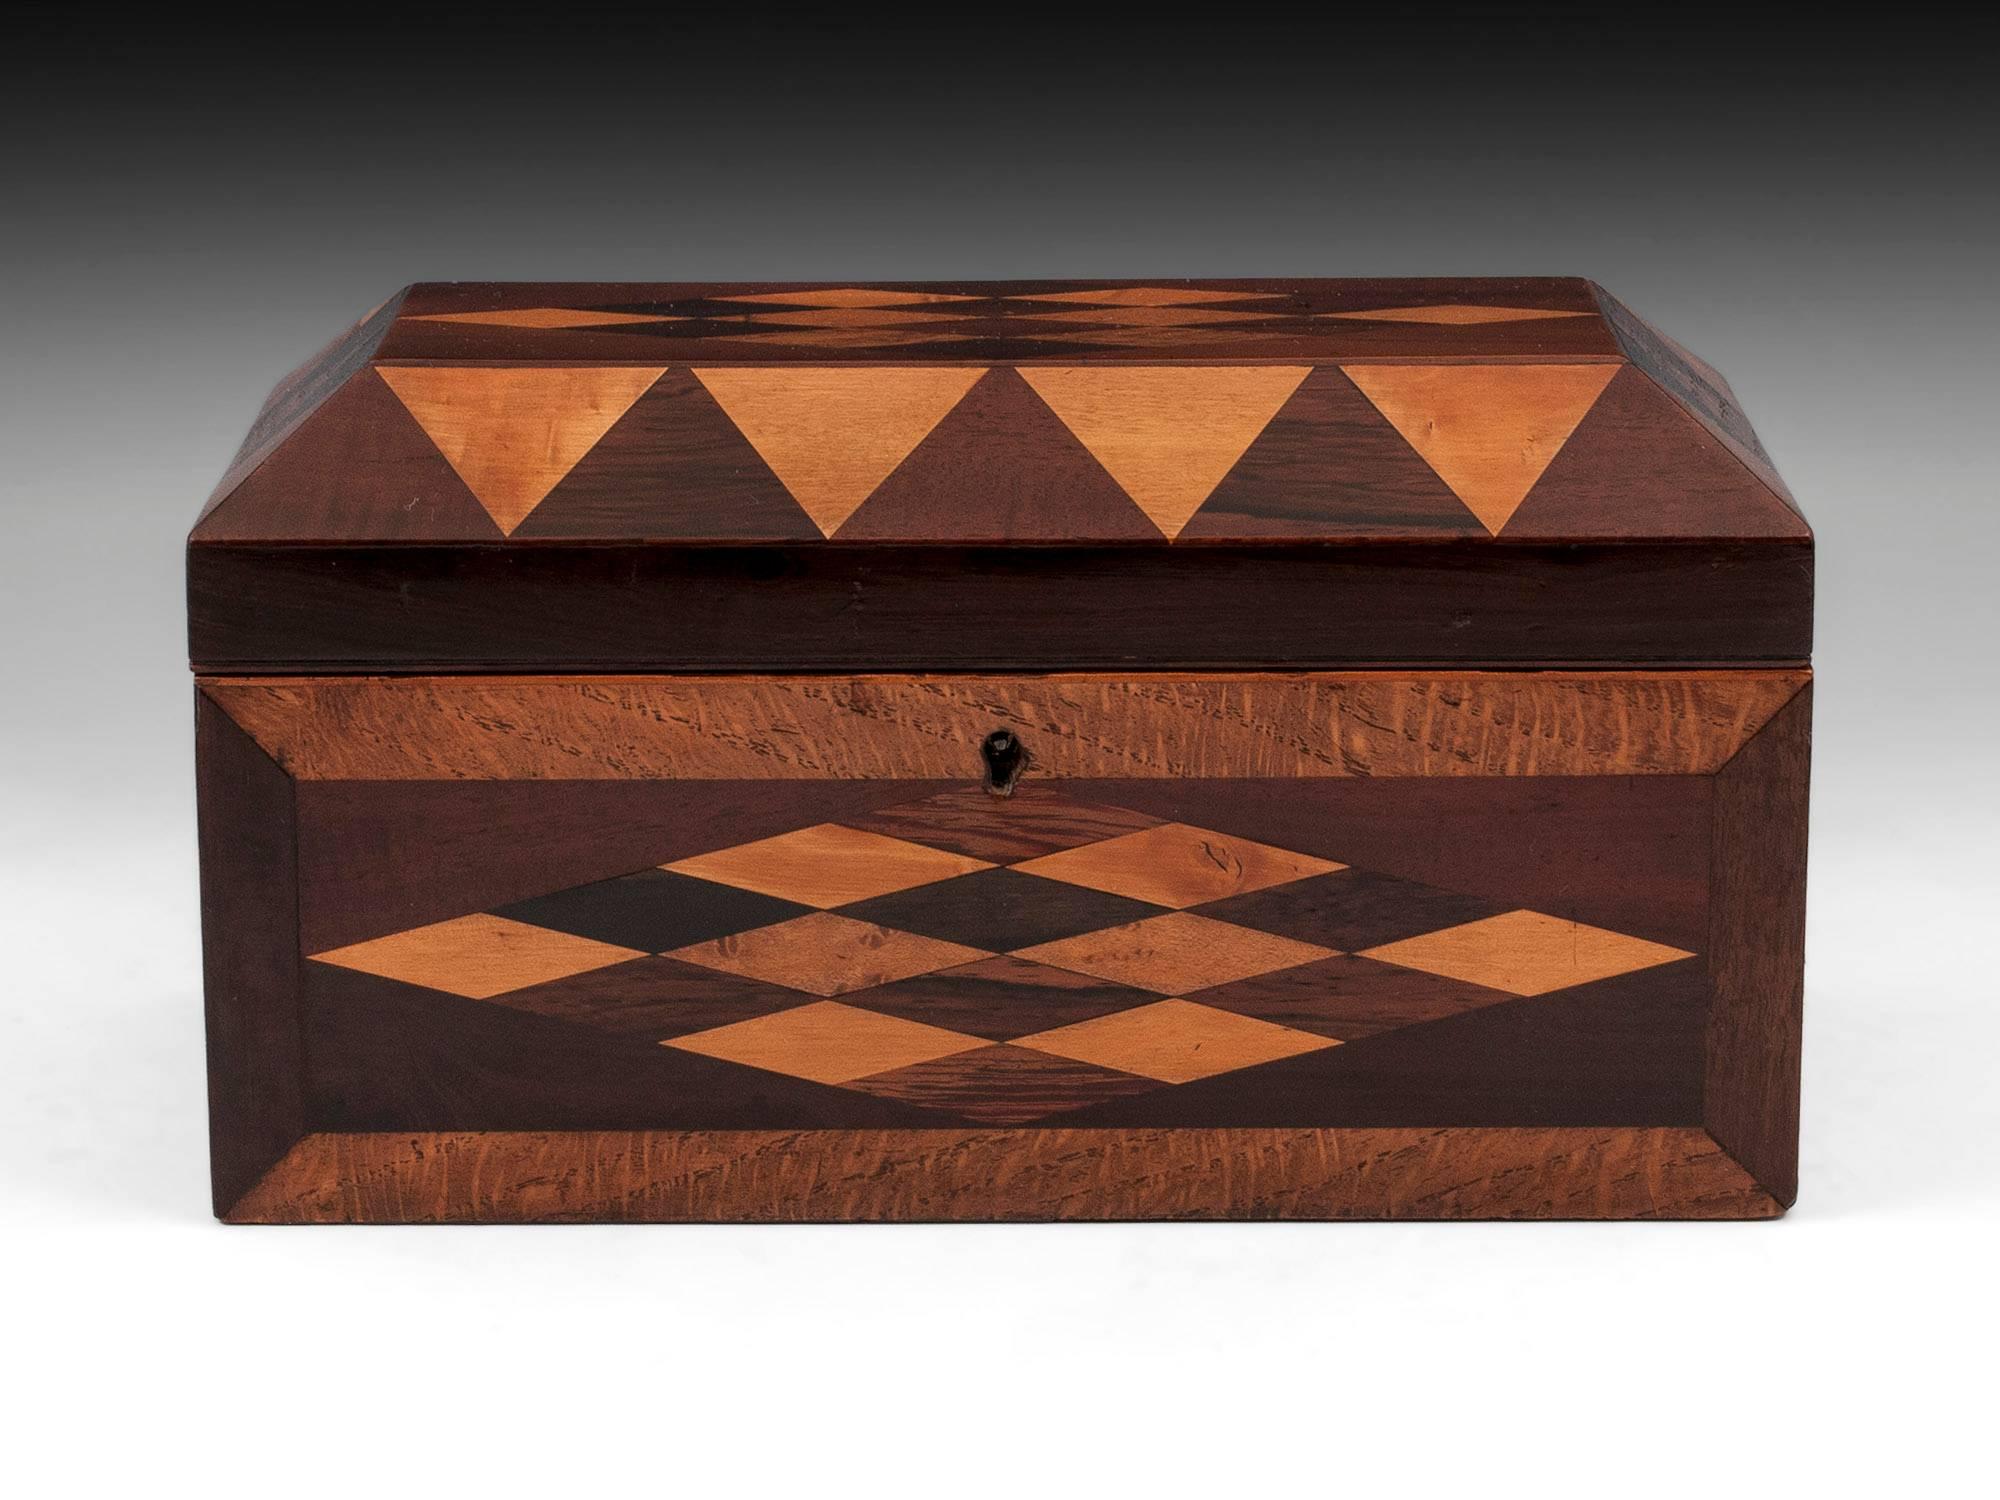 Antique box with diamond shaped design to the top and front with triangle shapes on the canted top. The veneered used to make the diamond patterns are; oak, maple, mahogany, palm, satinwood, Coromandel and cedar.

The interior of this decorative